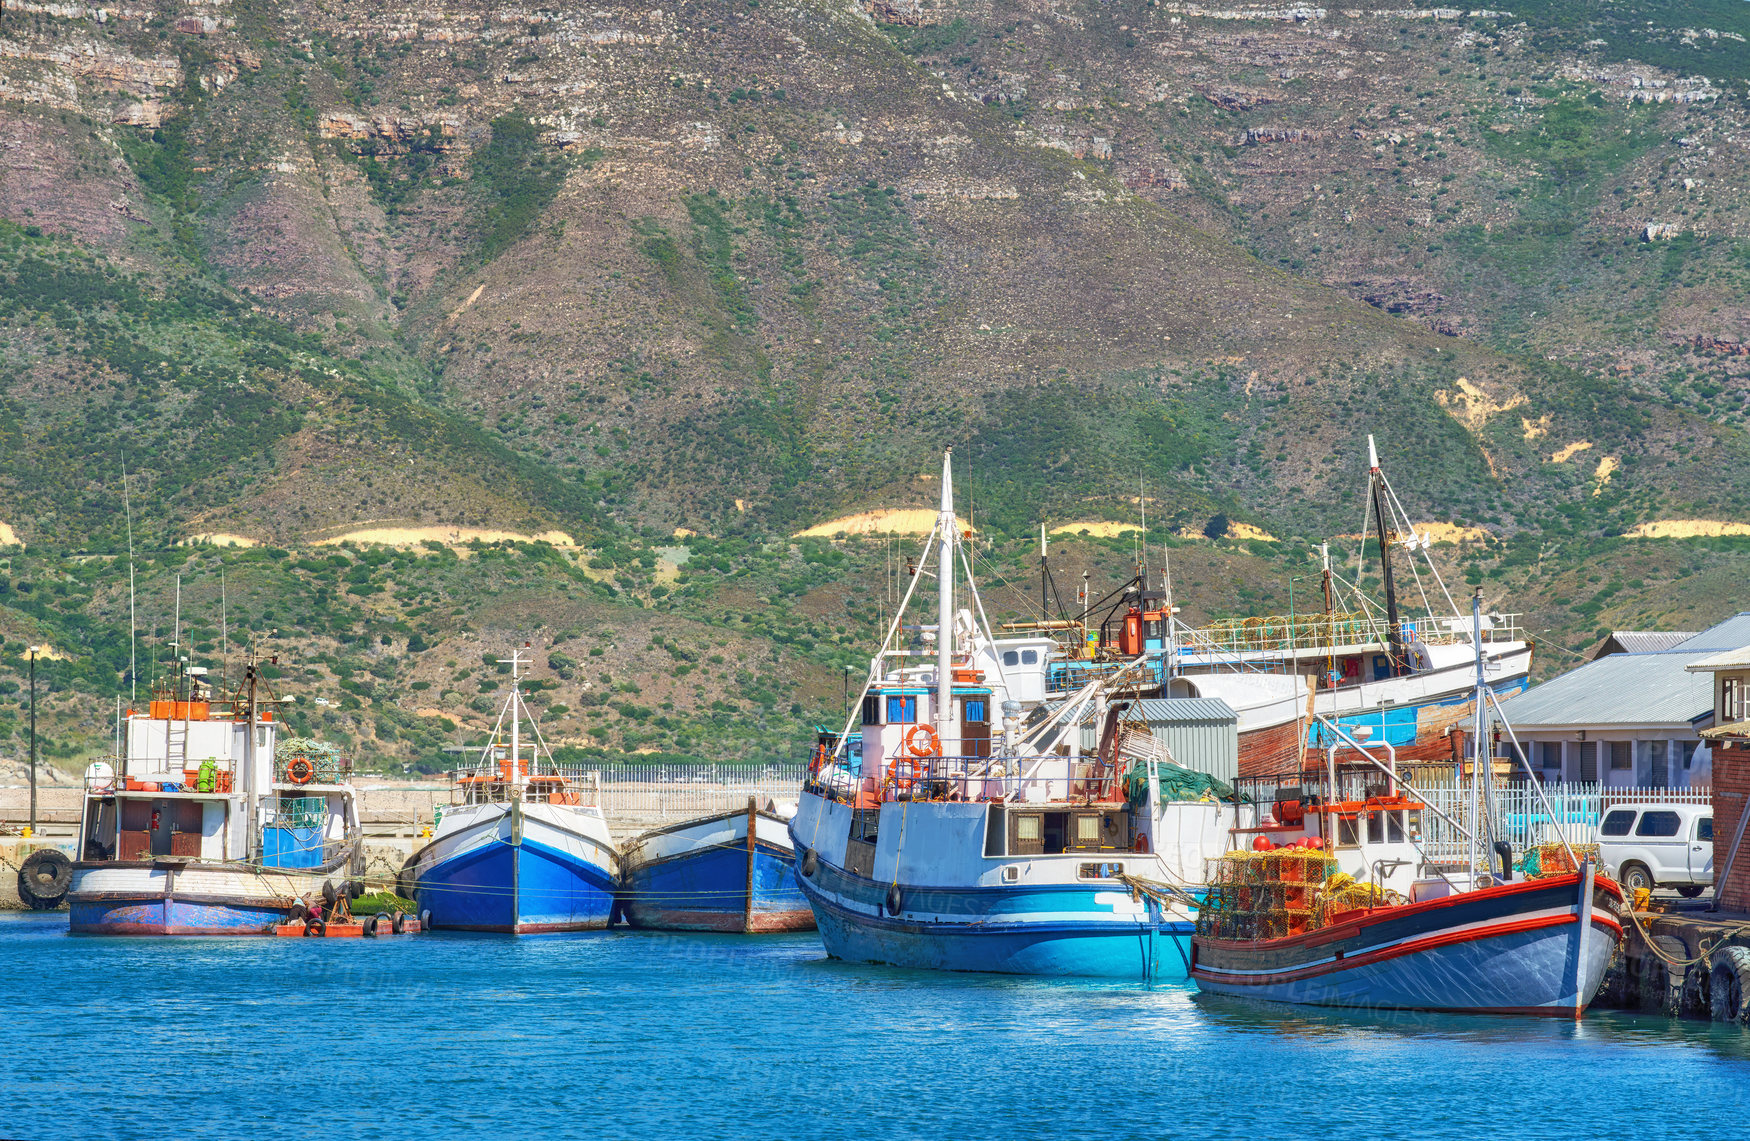 Buy stock photo Fishing boats in the harbor of Hout Bay - close to Cape Town, South Africa.